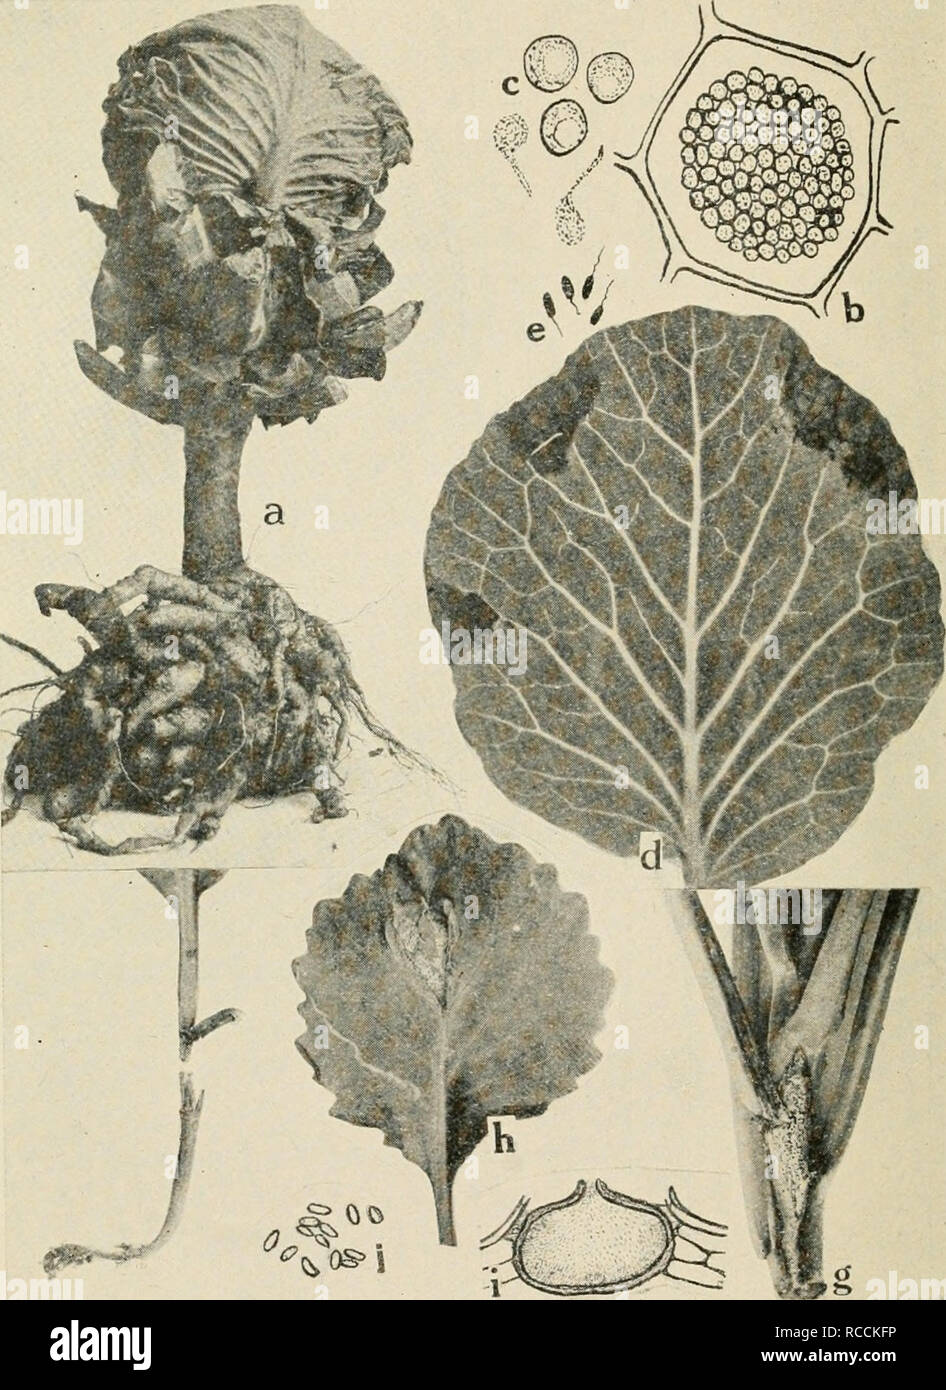 . Diseases of truck crops and their control. Vegetables. Fig. 30. Cabbage Diseases. a. Club root (after Cunningham), b. cell filled with spores of the club root or- ganism, c. spores and swarm spores of Plasmodiophora brassicce (b. and c. after Chuff), d. black rot of cabbage (after F. C. Stewart), e. individual black rot germs of Pseudomonas campeslris, f. black-leg on young cabbage seedling, g. black-leg lesion on foot of older cabbage plant, h. black-leg lesion on cabbage leaf, /. pycnidmm of Phoma oleracece, j. pycnosporvs of P. okracece (/'. and j. after Manns).. Please note that these im Stock Photo